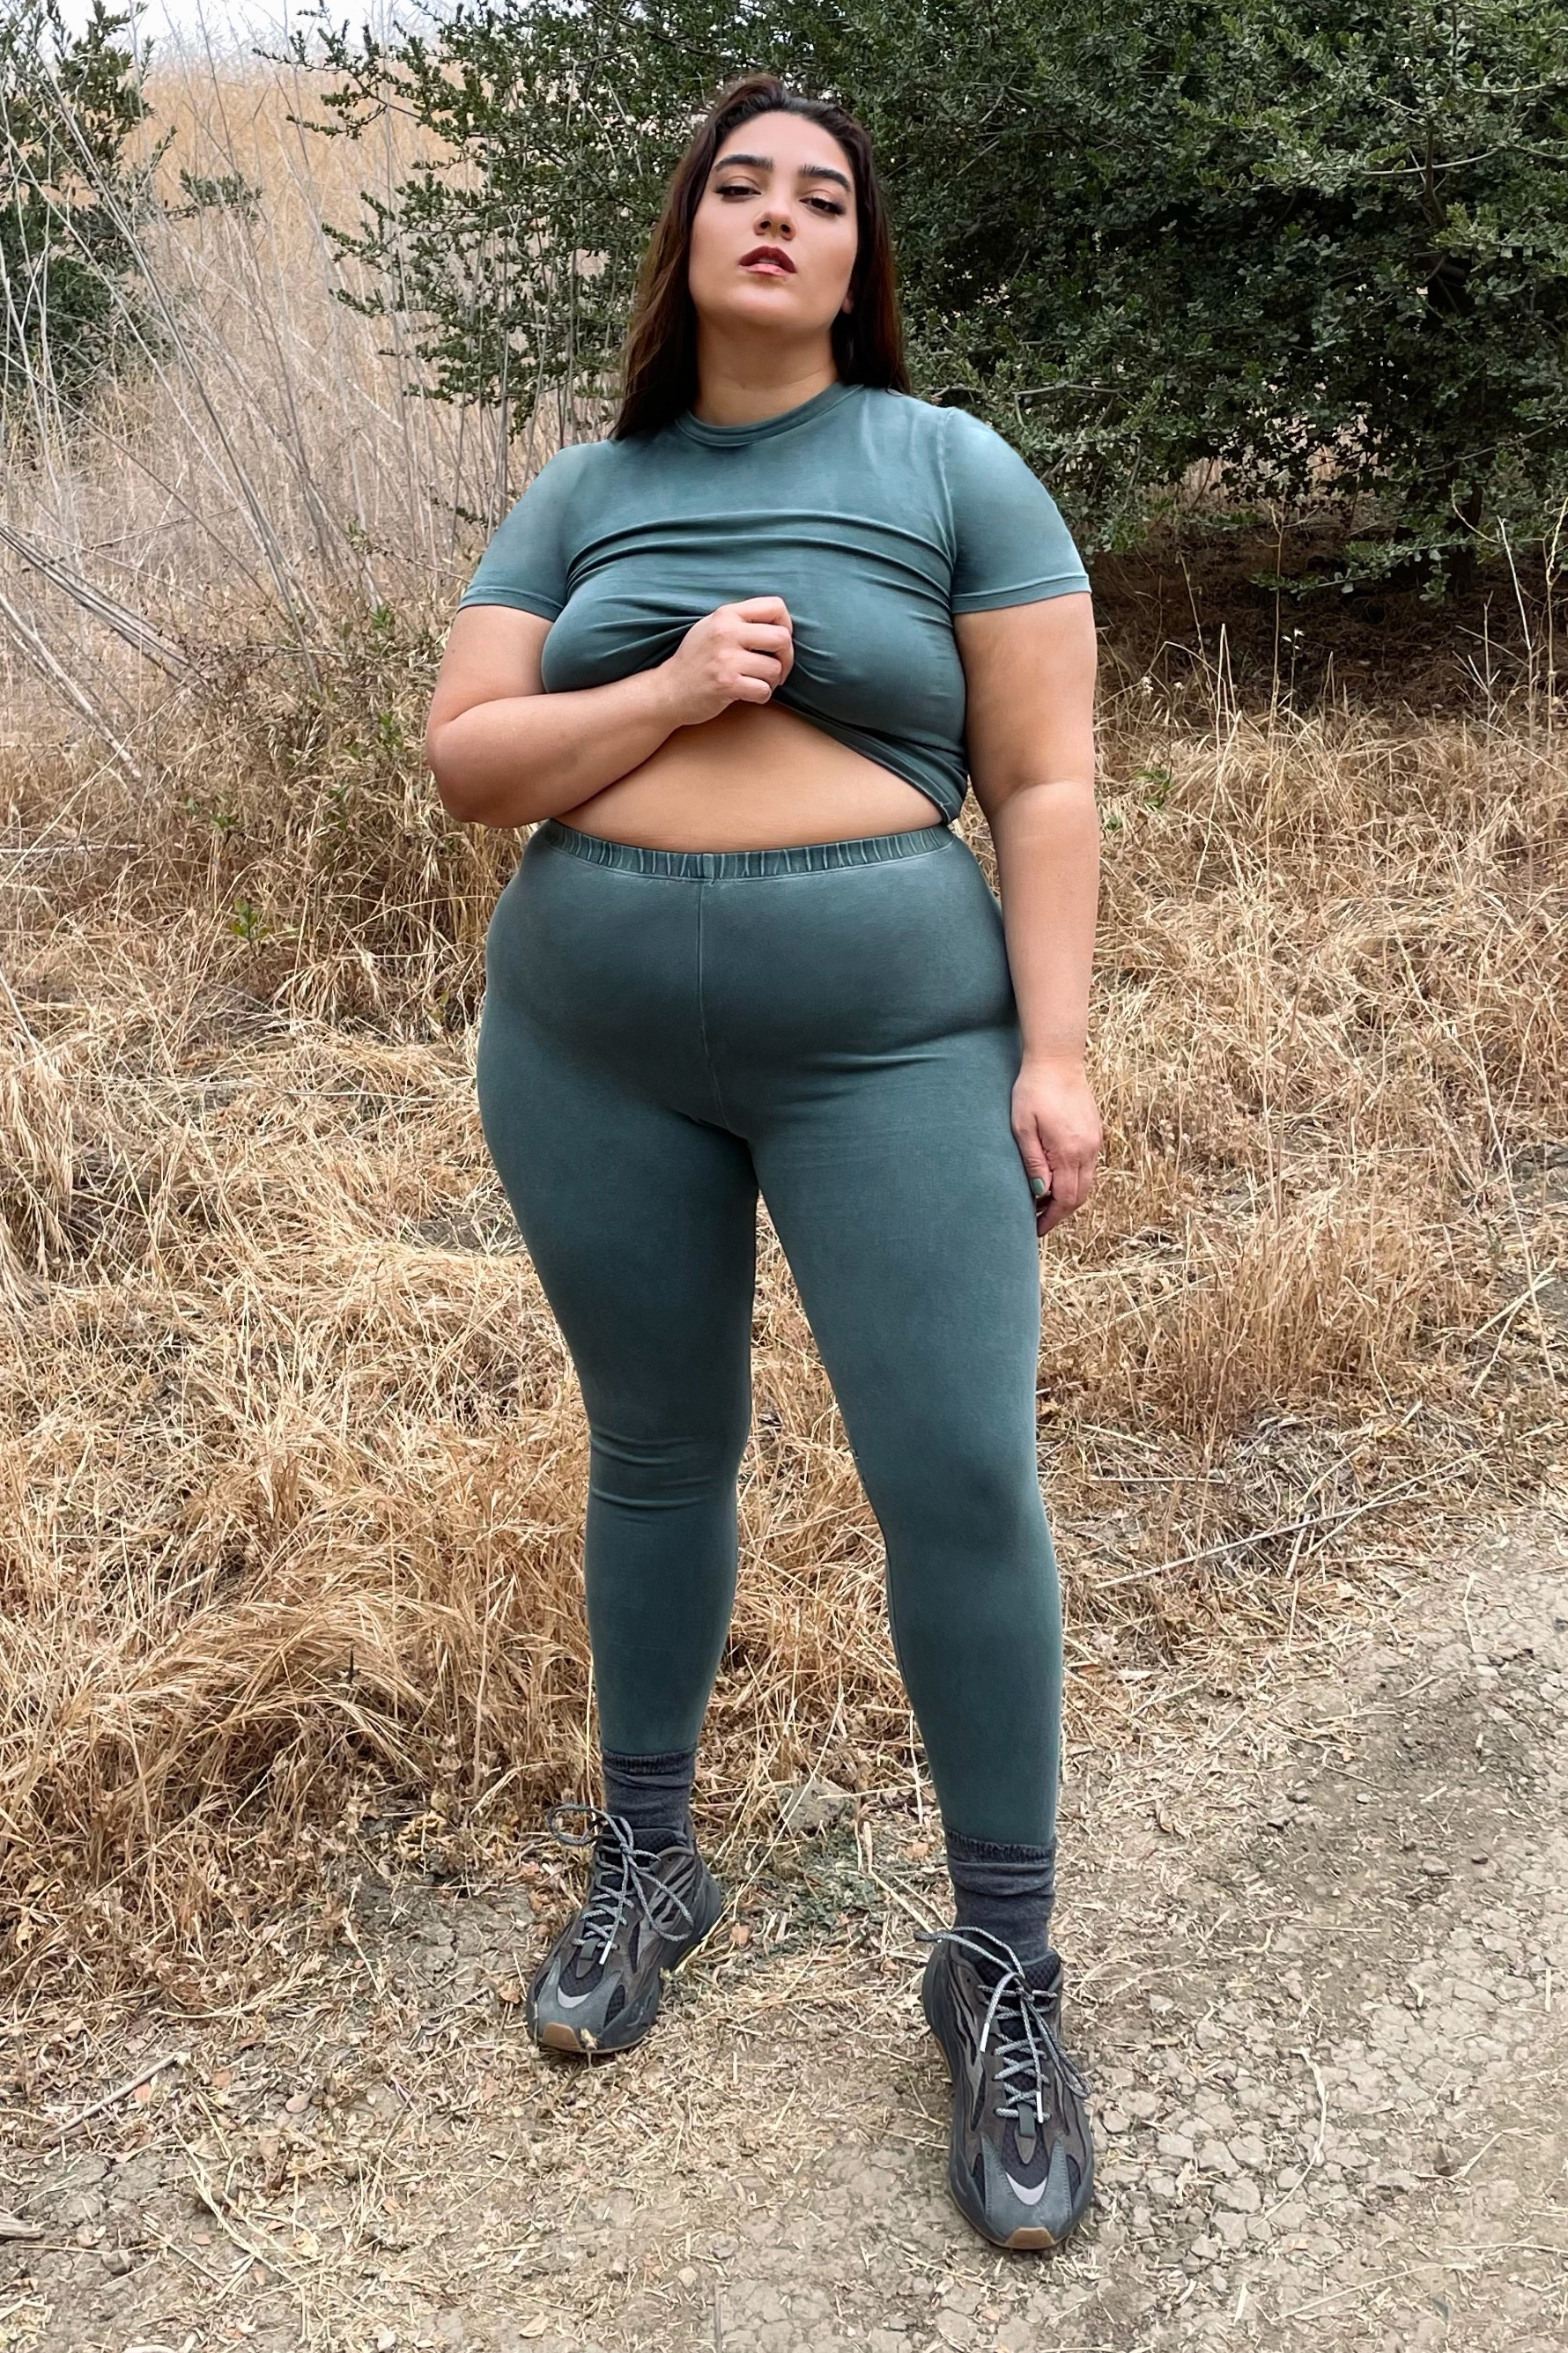 SKIMS on X: .@nadiaaboulhosn hits the trails in the Outdoor Basics T-Shirt  and Legging in Malachite. Our first outdoor collection is perfect for hikes  (and post-hike pics). Shop Outdoor Basics Drop 1